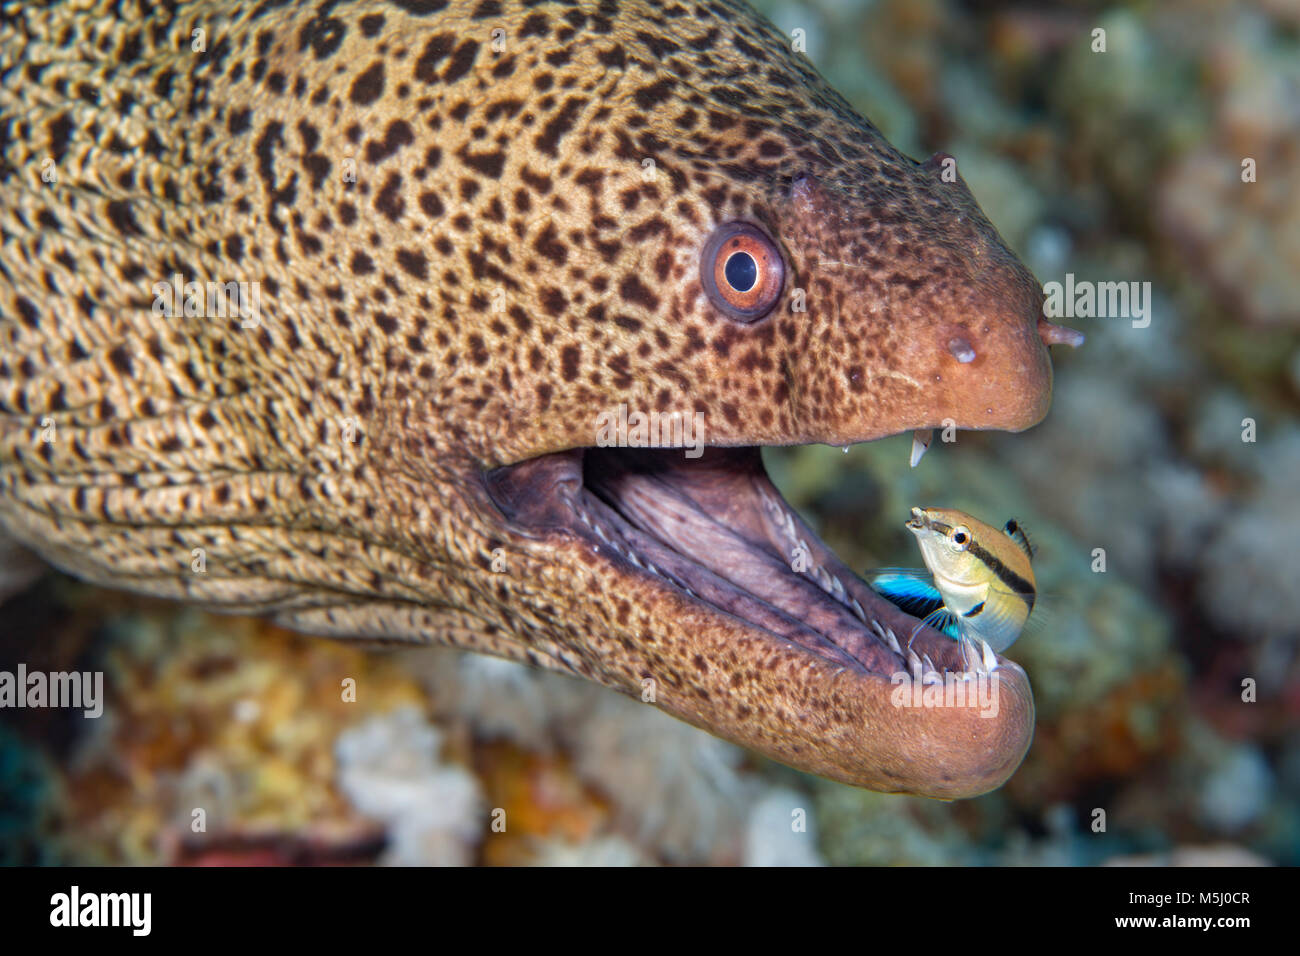 Egypt, Red Sea, Hurghada, giant moray with common cleaner wrasse Stock Photo